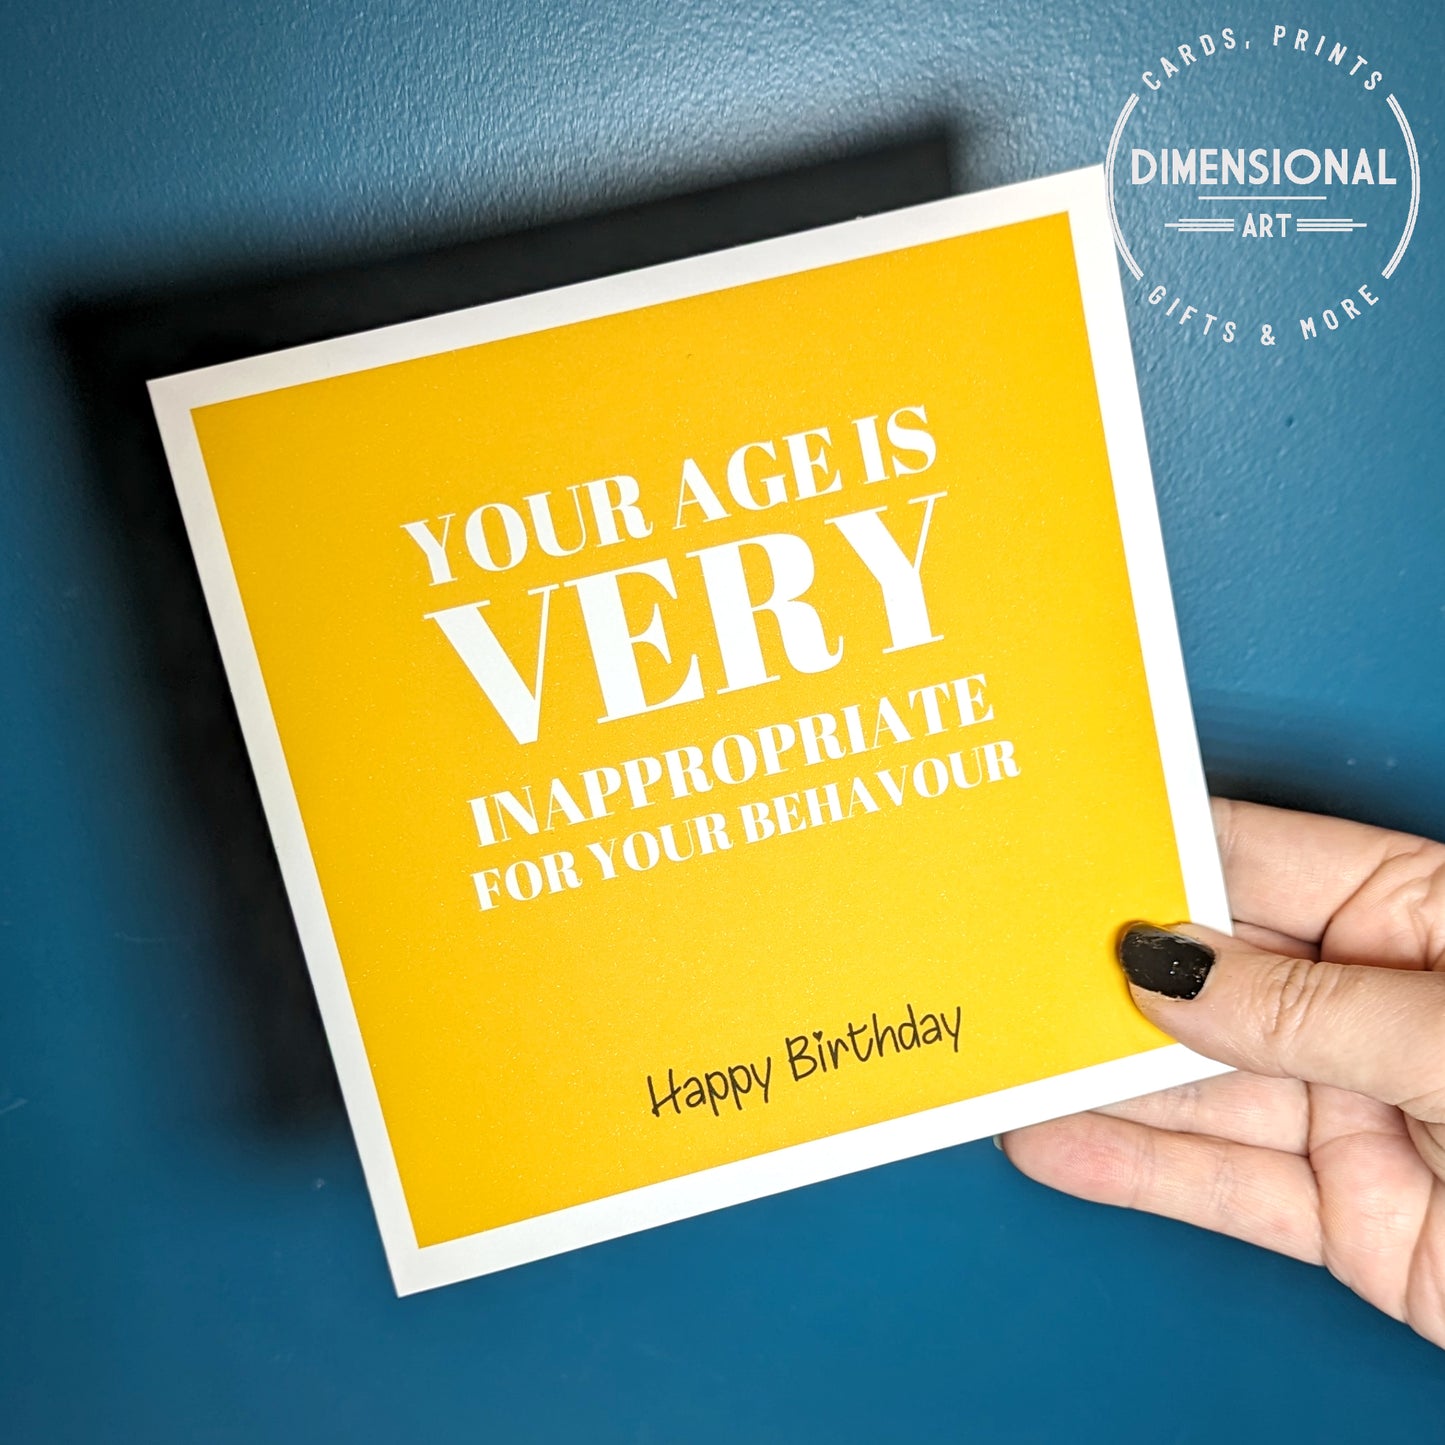 Your age is very inappropriate for you age - Birthday Card